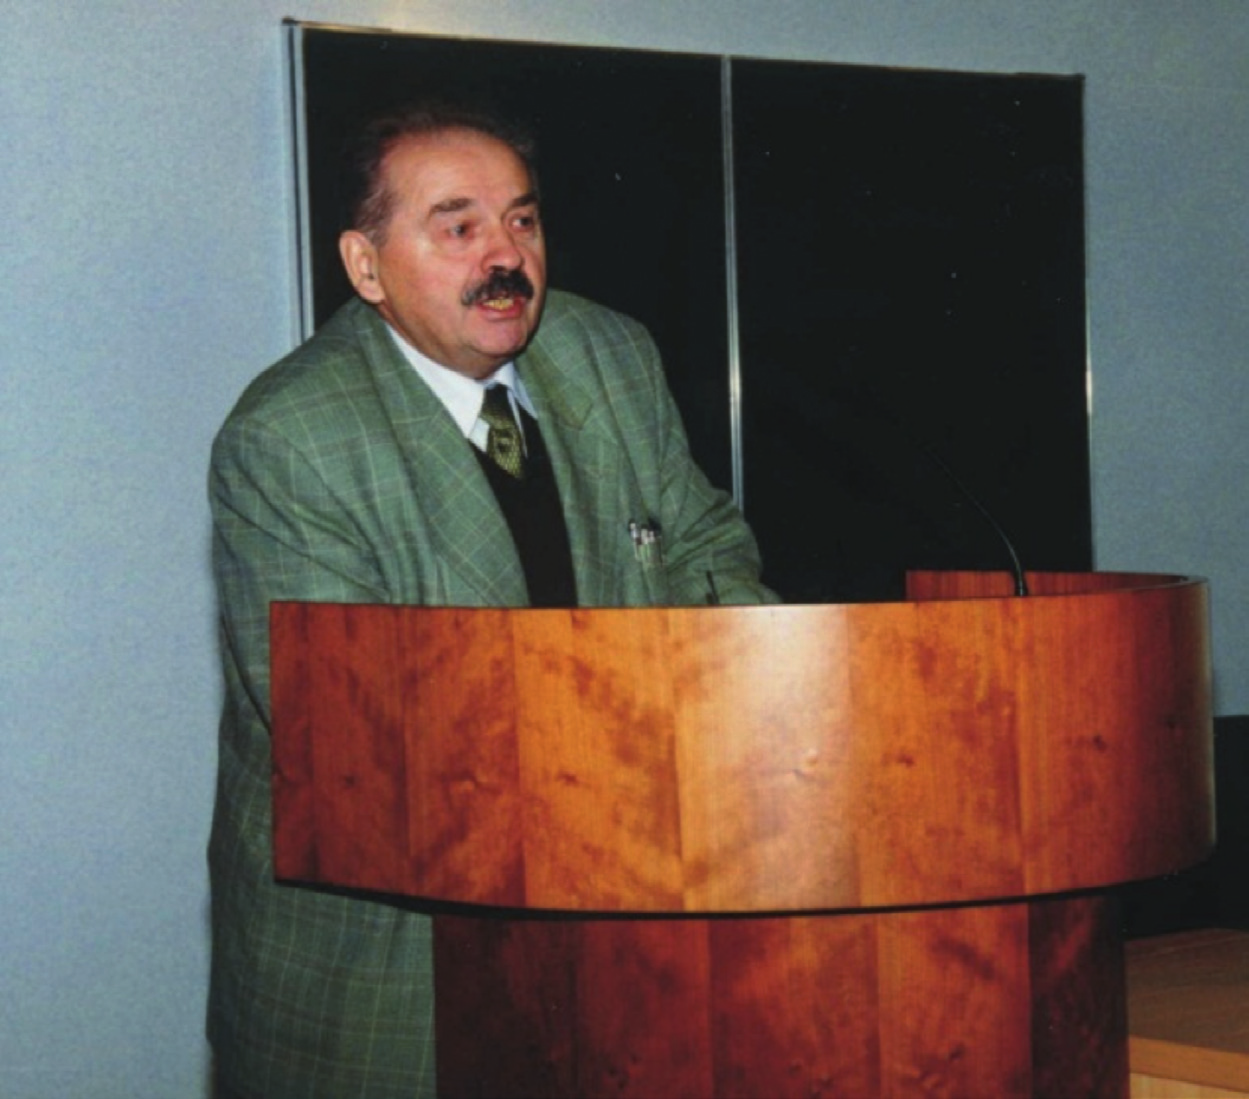 Plenary lectures We dedicate the plenary session and lectures to Professor Janusz B.